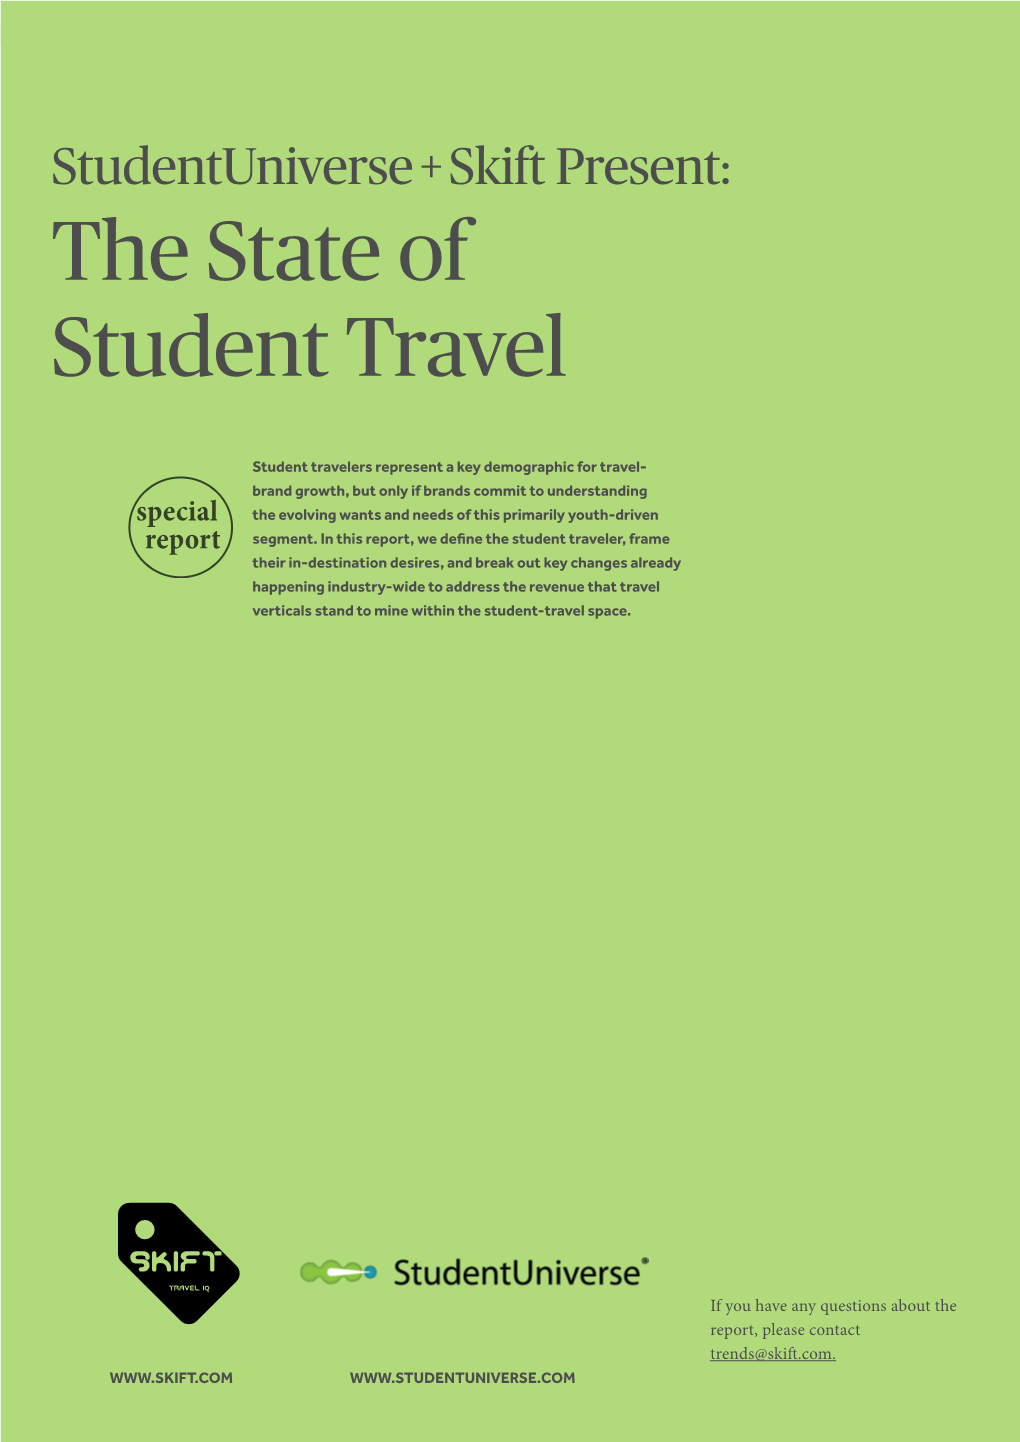 Studentuniverse + Skift Present: the State of Student Travel